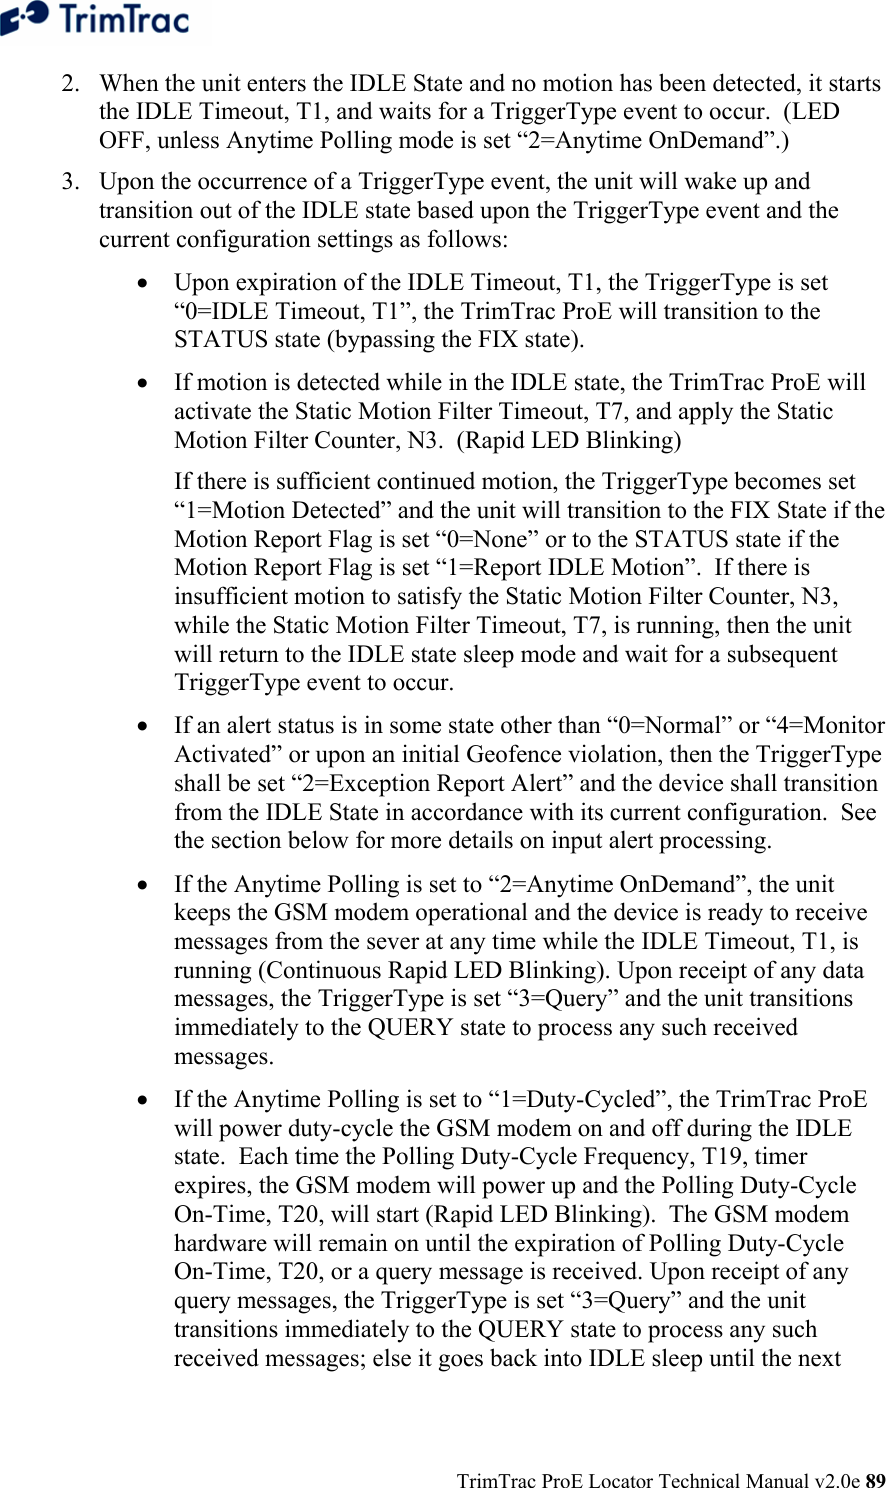  TrimTrac ProE Locator Technical Manual v2.0e 89 2. When the unit enters the IDLE State and no motion has been detected, it starts the IDLE Timeout, T1, and waits for a TriggerType event to occur.  (LED OFF, unless Anytime Polling mode is set “2=Anytime OnDemand”.) 3. Upon the occurrence of a TriggerType event, the unit will wake up and transition out of the IDLE state based upon the TriggerType event and the current configuration settings as follows:  • Upon expiration of the IDLE Timeout, T1, the TriggerType is set “0=IDLE Timeout, T1”, the TrimTrac ProE will transition to the STATUS state (bypassing the FIX state). • If motion is detected while in the IDLE state, the TrimTrac ProE will activate the Static Motion Filter Timeout, T7, and apply the Static Motion Filter Counter, N3.  (Rapid LED Blinking)   If there is sufficient continued motion, the TriggerType becomes set “1=Motion Detected” and the unit will transition to the FIX State if the Motion Report Flag is set “0=None” or to the STATUS state if the Motion Report Flag is set “1=Report IDLE Motion”.  If there is insufficient motion to satisfy the Static Motion Filter Counter, N3, while the Static Motion Filter Timeout, T7, is running, then the unit will return to the IDLE state sleep mode and wait for a subsequent TriggerType event to occur. • If an alert status is in some state other than “0=Normal” or “4=Monitor Activated” or upon an initial Geofence violation, then the TriggerType shall be set “2=Exception Report Alert” and the device shall transition from the IDLE State in accordance with its current configuration.  See the section below for more details on input alert processing. • If the Anytime Polling is set to “2=Anytime OnDemand”, the unit keeps the GSM modem operational and the device is ready to receive messages from the sever at any time while the IDLE Timeout, T1, is running (Continuous Rapid LED Blinking). Upon receipt of any data messages, the TriggerType is set “3=Query” and the unit transitions immediately to the QUERY state to process any such received messages. • If the Anytime Polling is set to “1=Duty-Cycled”, the TrimTrac ProE will power duty-cycle the GSM modem on and off during the IDLE state.  Each time the Polling Duty-Cycle Frequency, T19, timer expires, the GSM modem will power up and the Polling Duty-Cycle On-Time, T20, will start (Rapid LED Blinking).  The GSM modem hardware will remain on until the expiration of Polling Duty-Cycle On-Time, T20, or a query message is received. Upon receipt of any query messages, the TriggerType is set “3=Query” and the unit transitions immediately to the QUERY state to process any such received messages; else it goes back into IDLE sleep until the next 